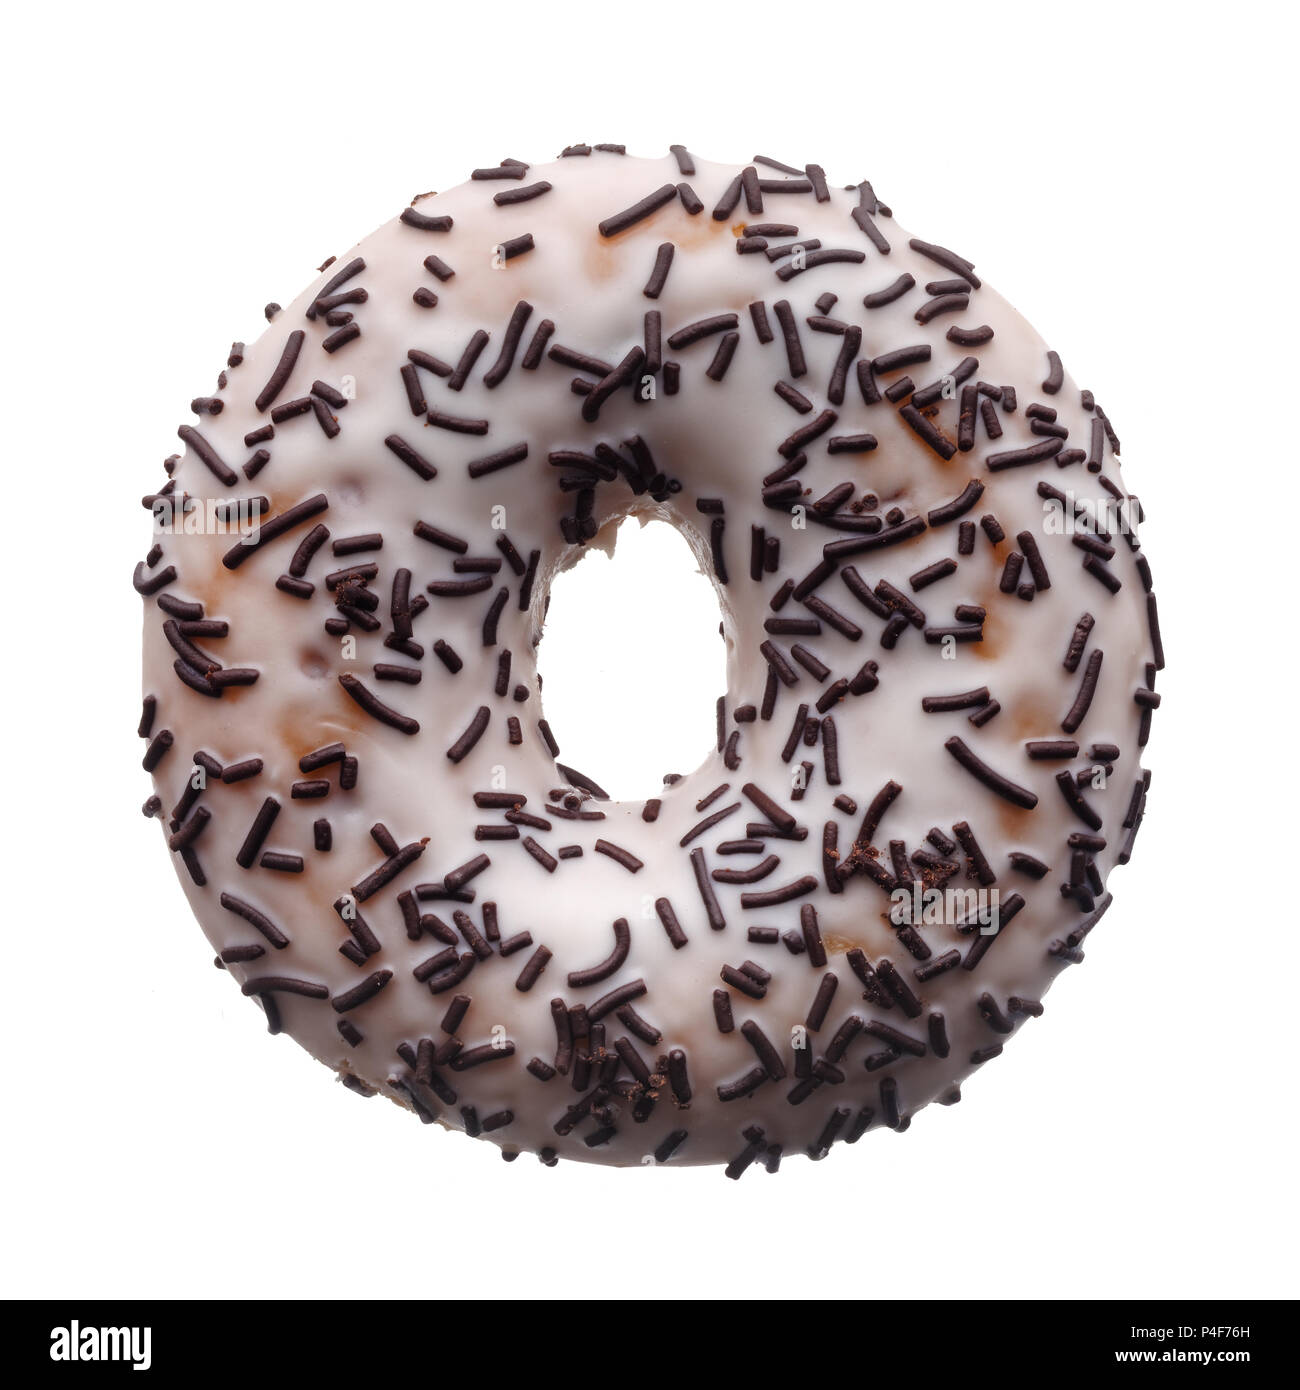 Food: white glaze and chocolate sprinkles donut, isolated on white background Stock Photo